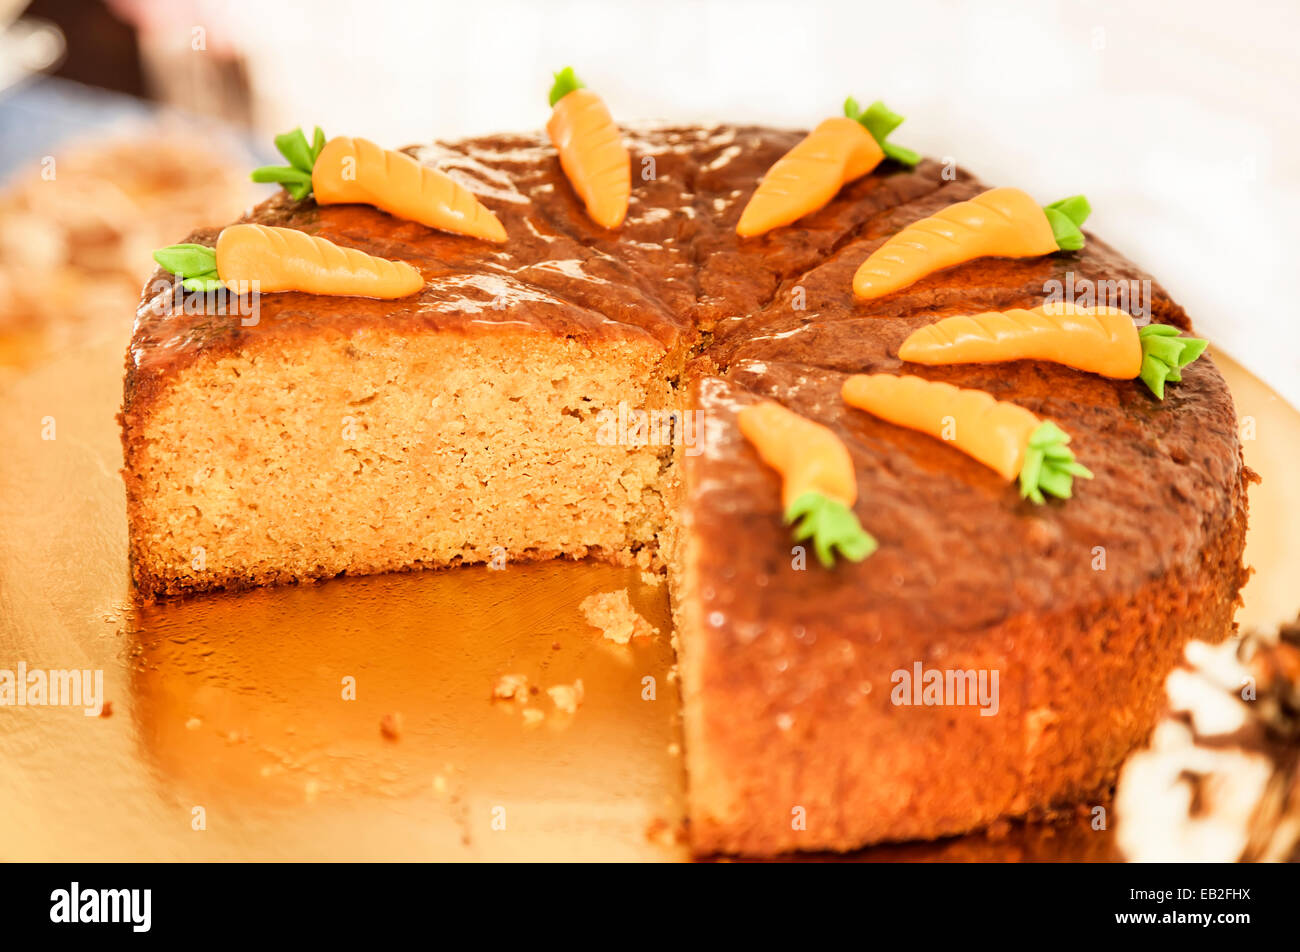 Carrot cake decorated with carrots on the top Stock Photo